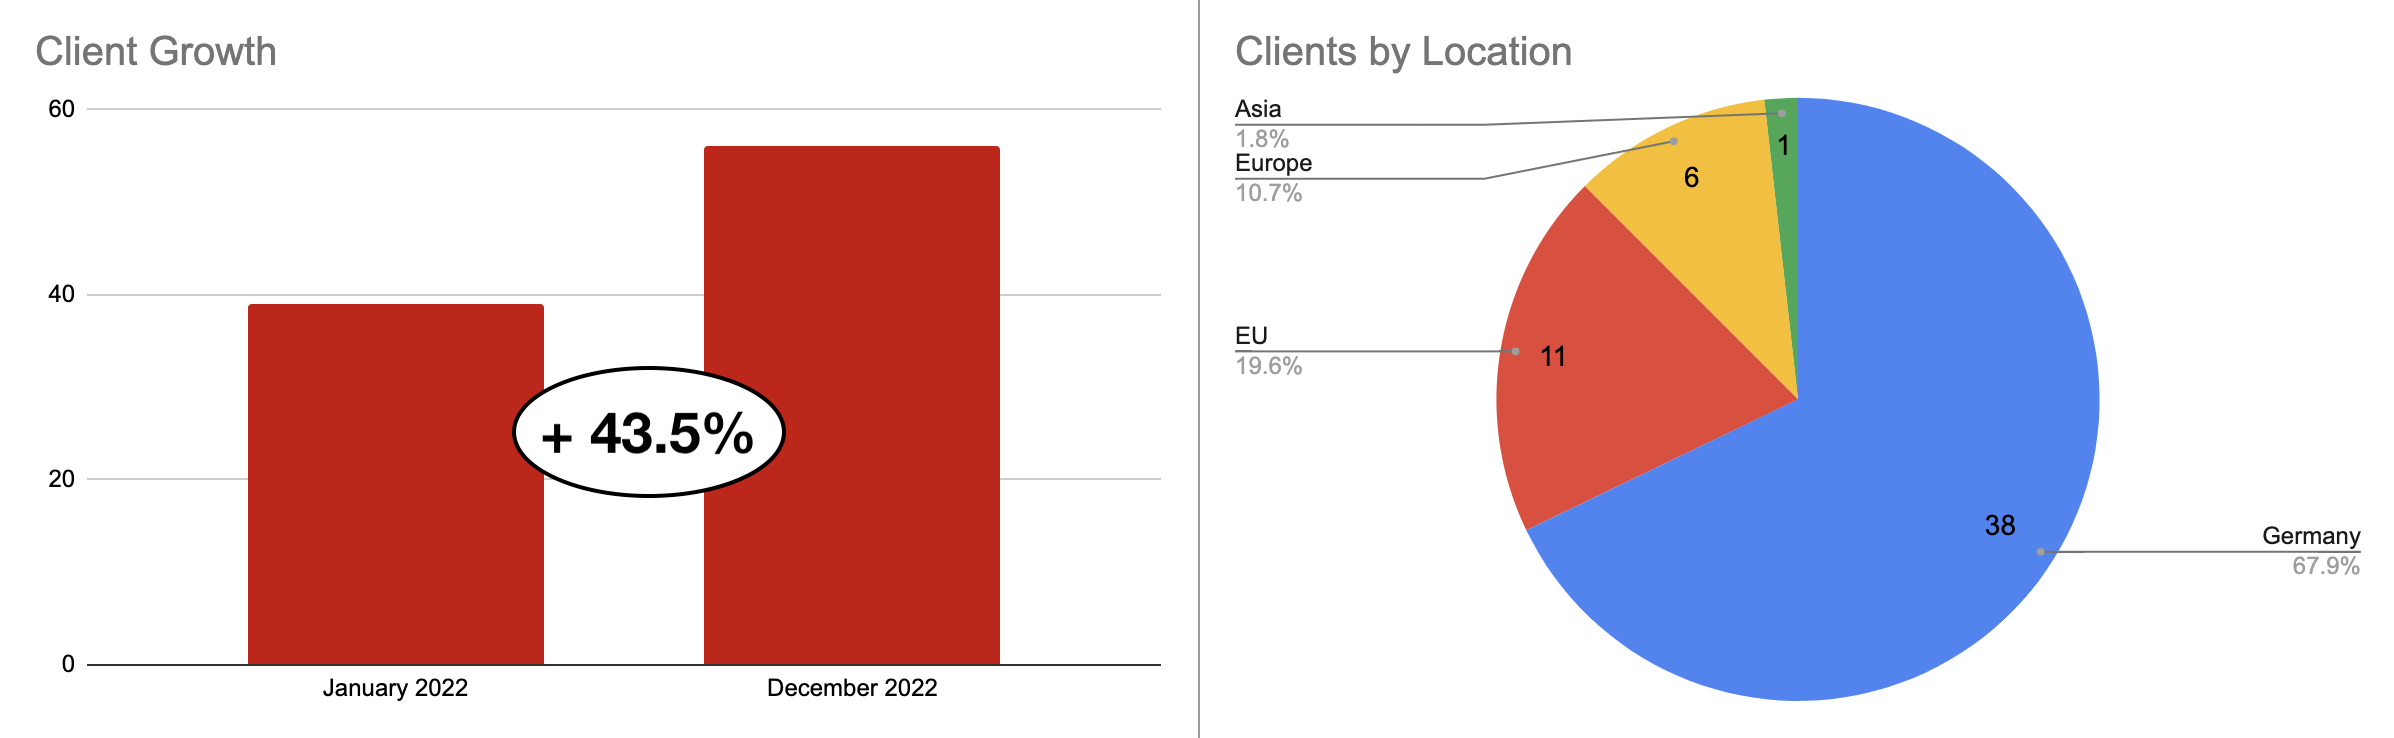 Graphs: Client Growth (left) and Clients by Location (right)